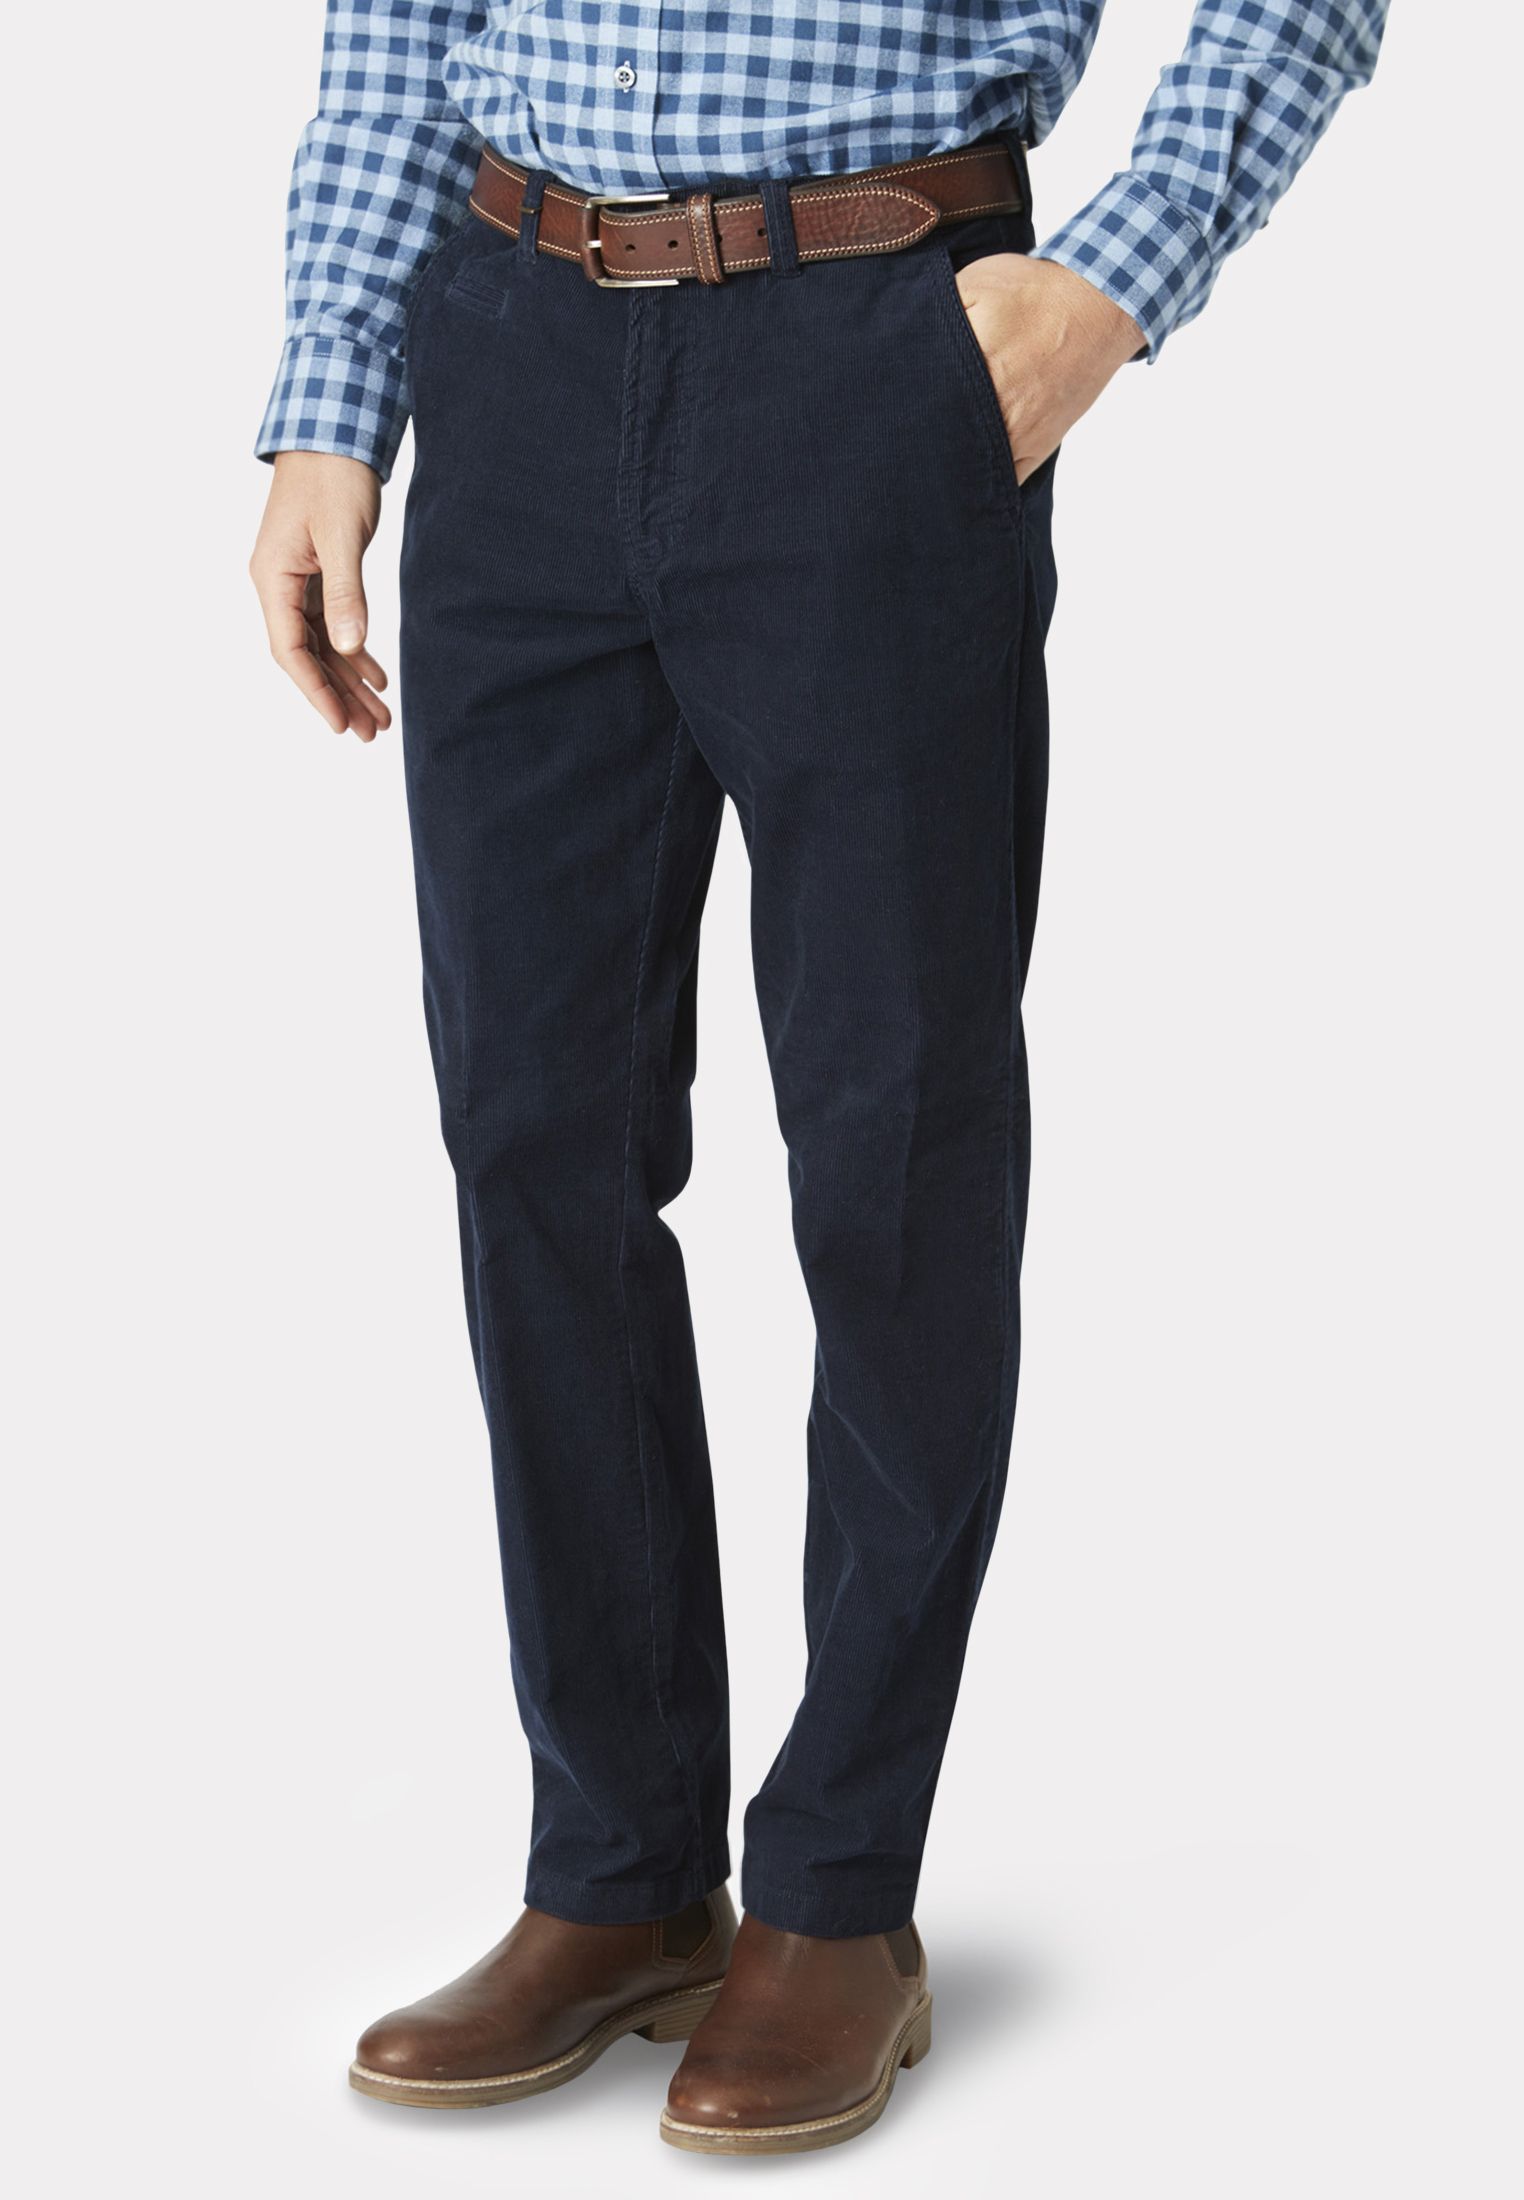 Slim Stretch Textured Tailored Pant - Almond, Suit Pants